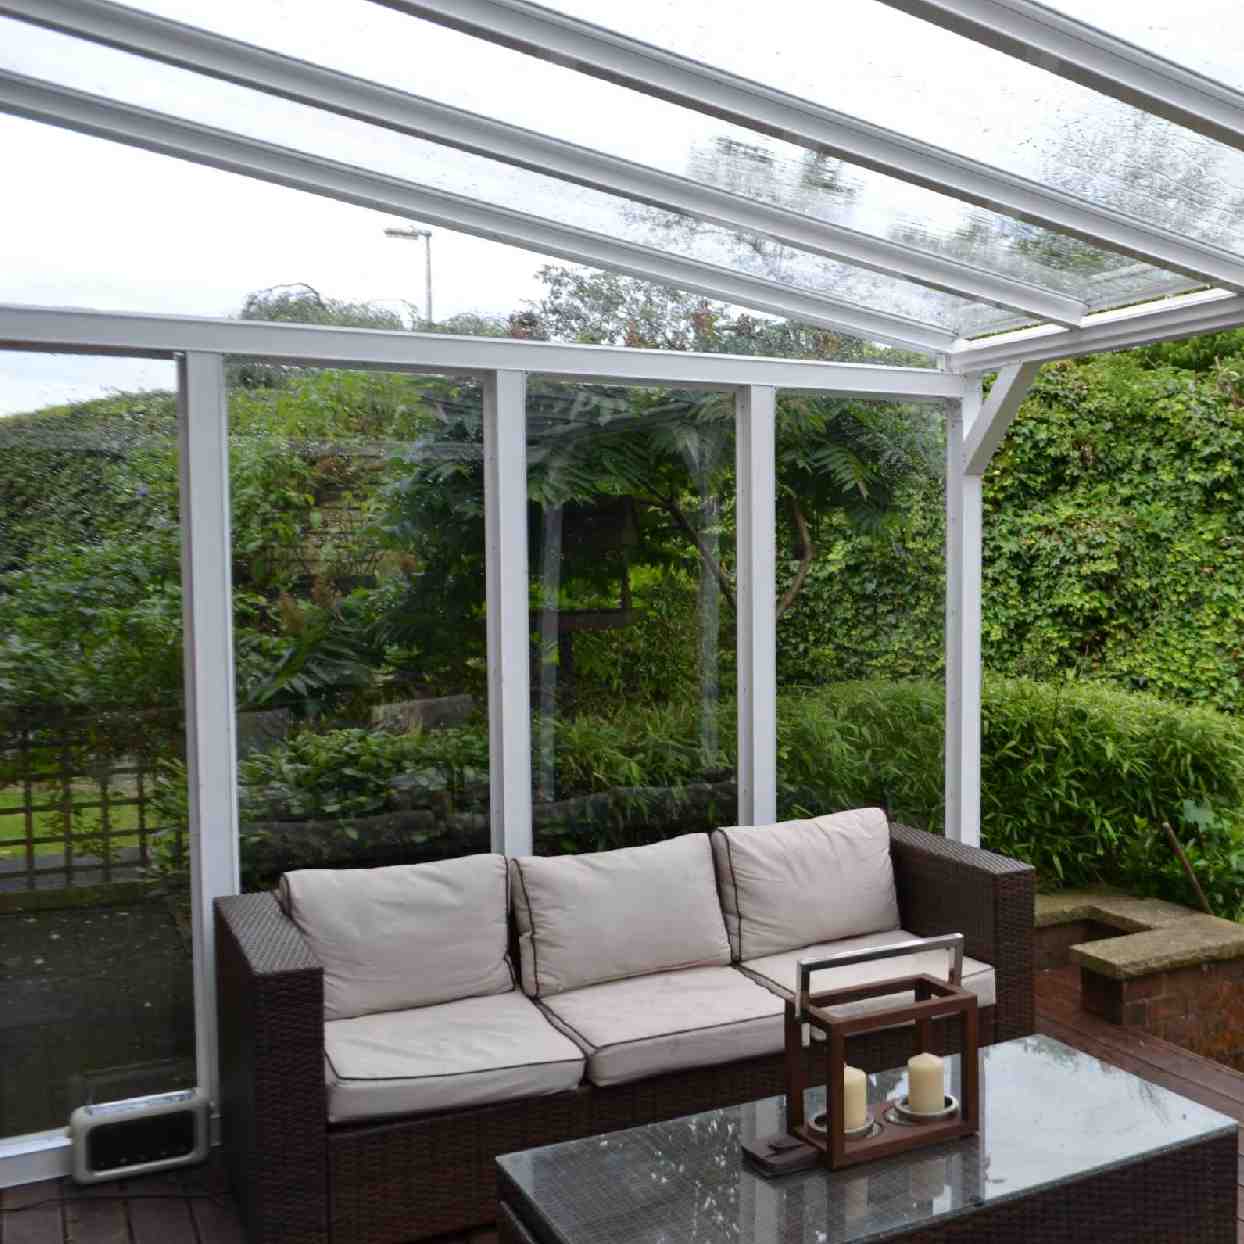 Buy Omega Verandah White with 6mm Glass Clear Plate Polycarbonate Glazing - 2.1m (W) x 2.5m (P), (2) Supporting Posts online today